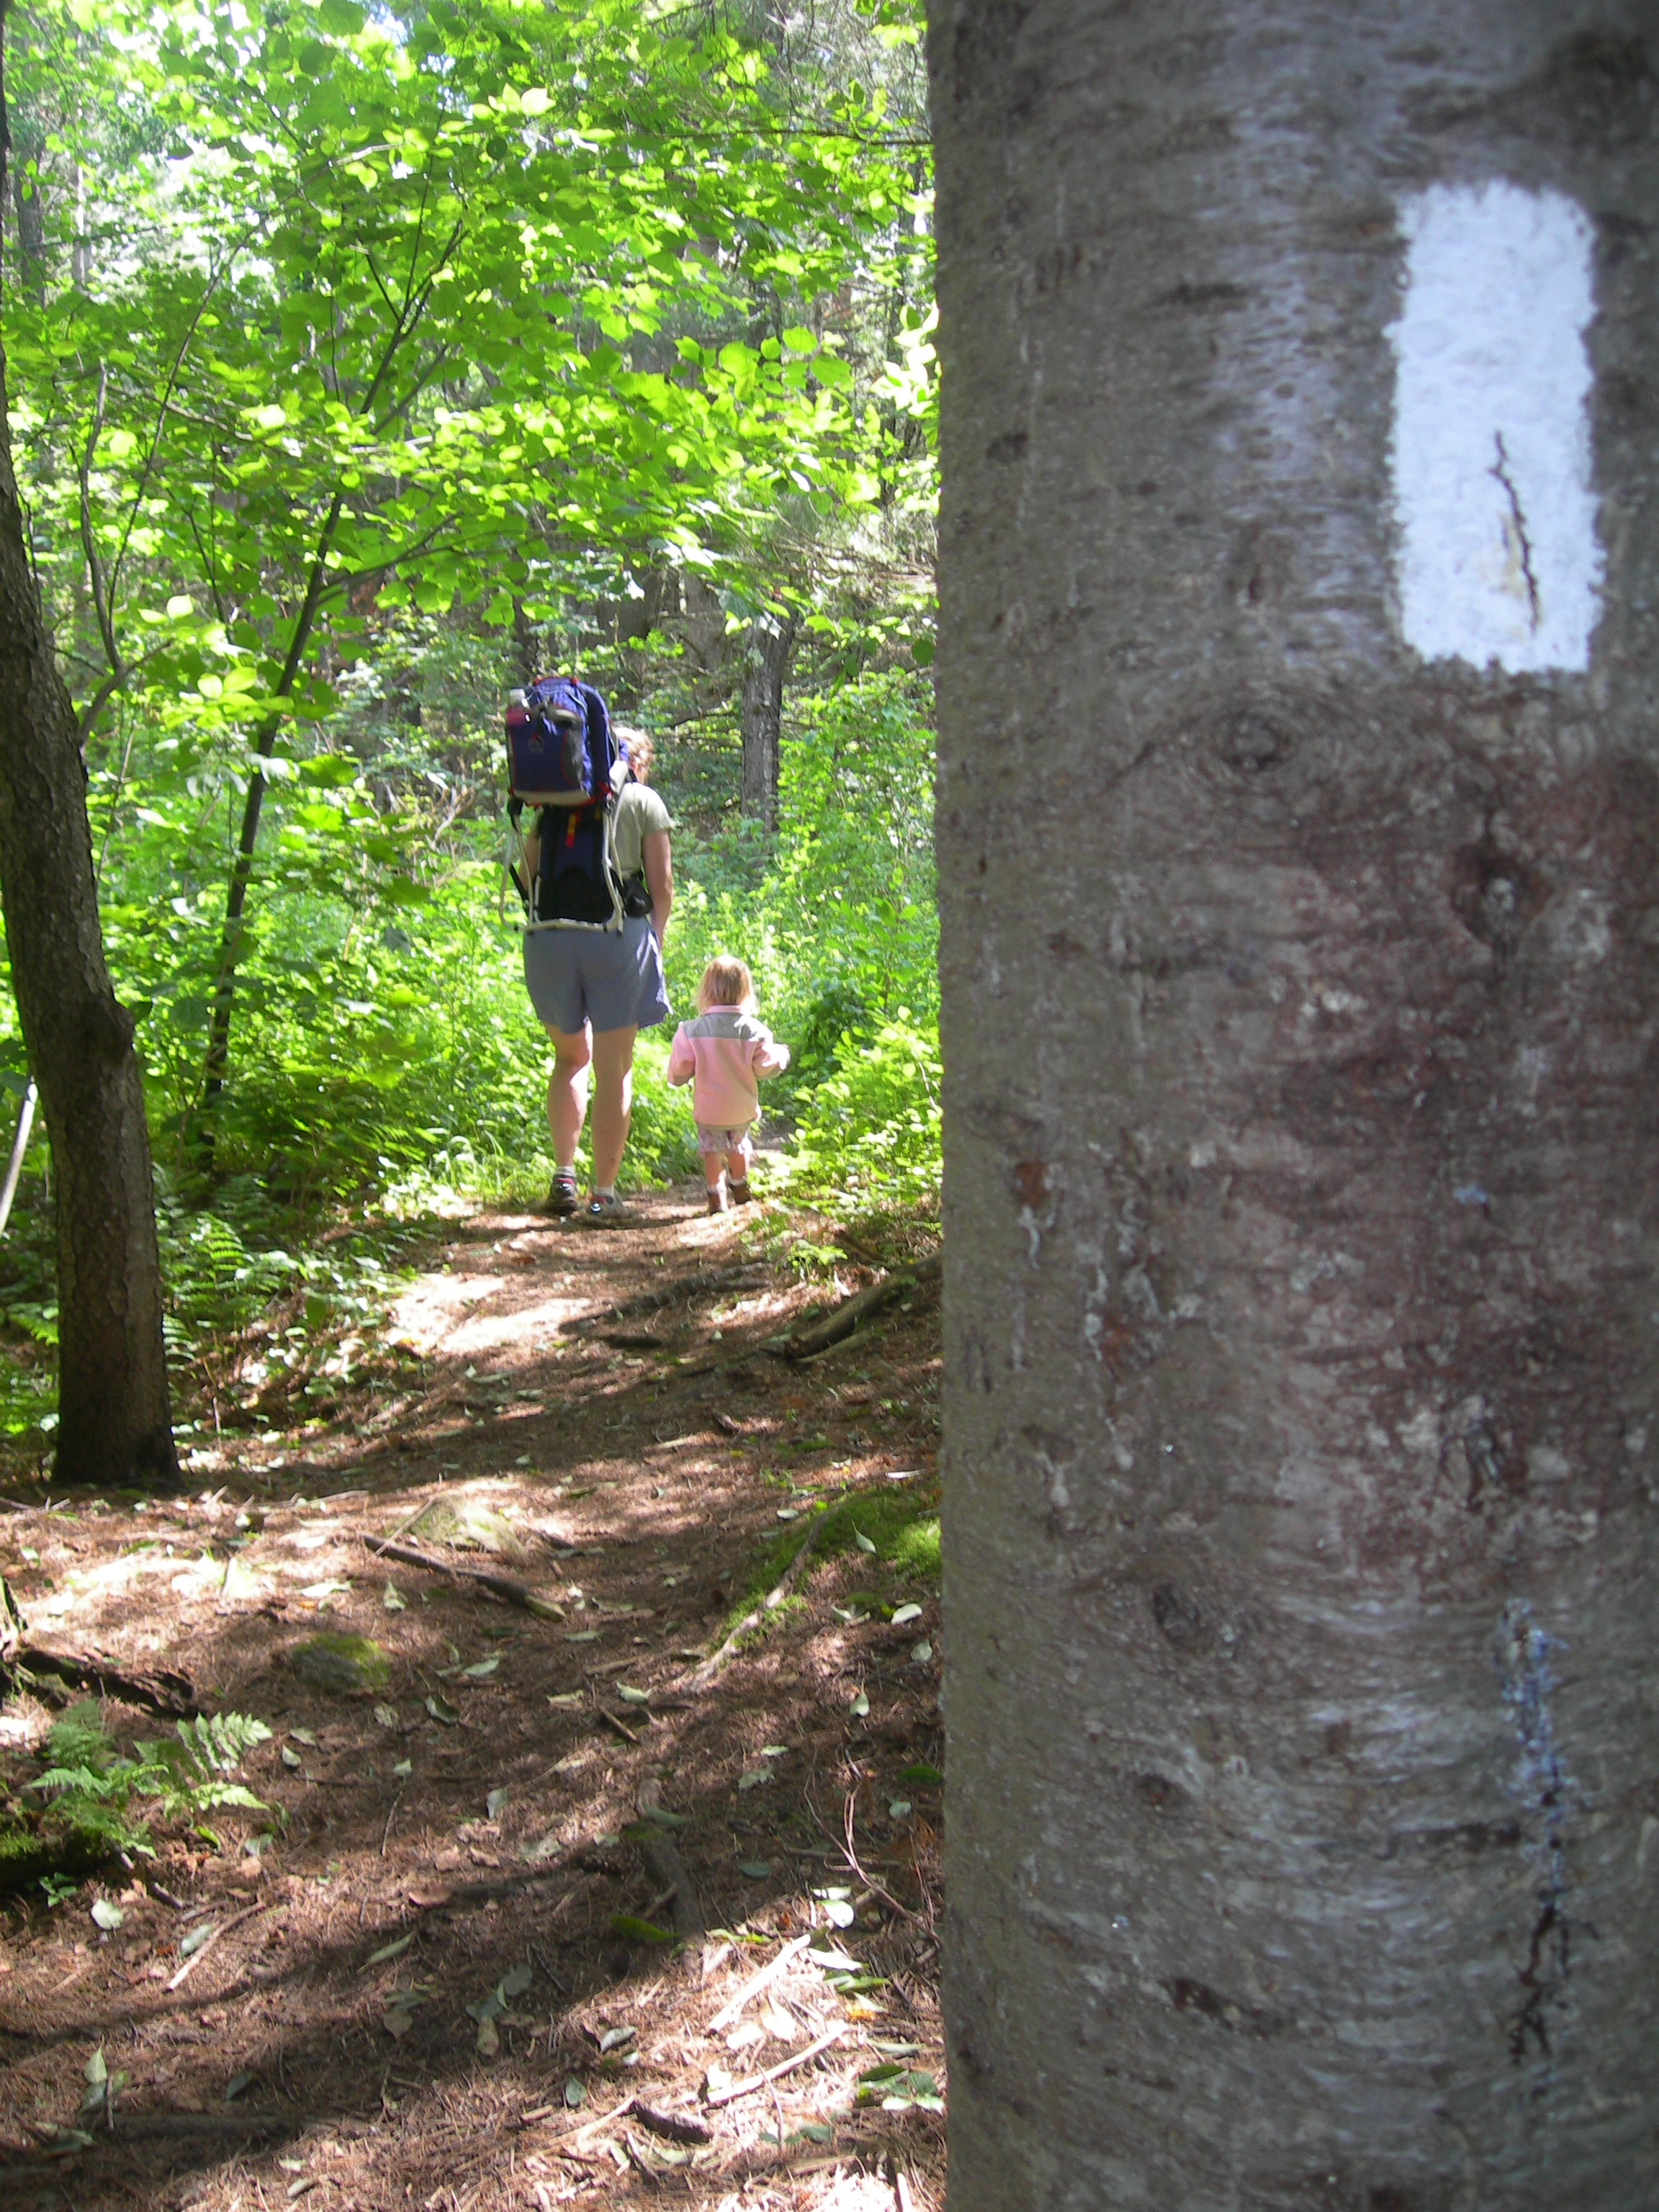 A white blaze marks a tree in the foreground, with a man and child walking away on the wooded trail.